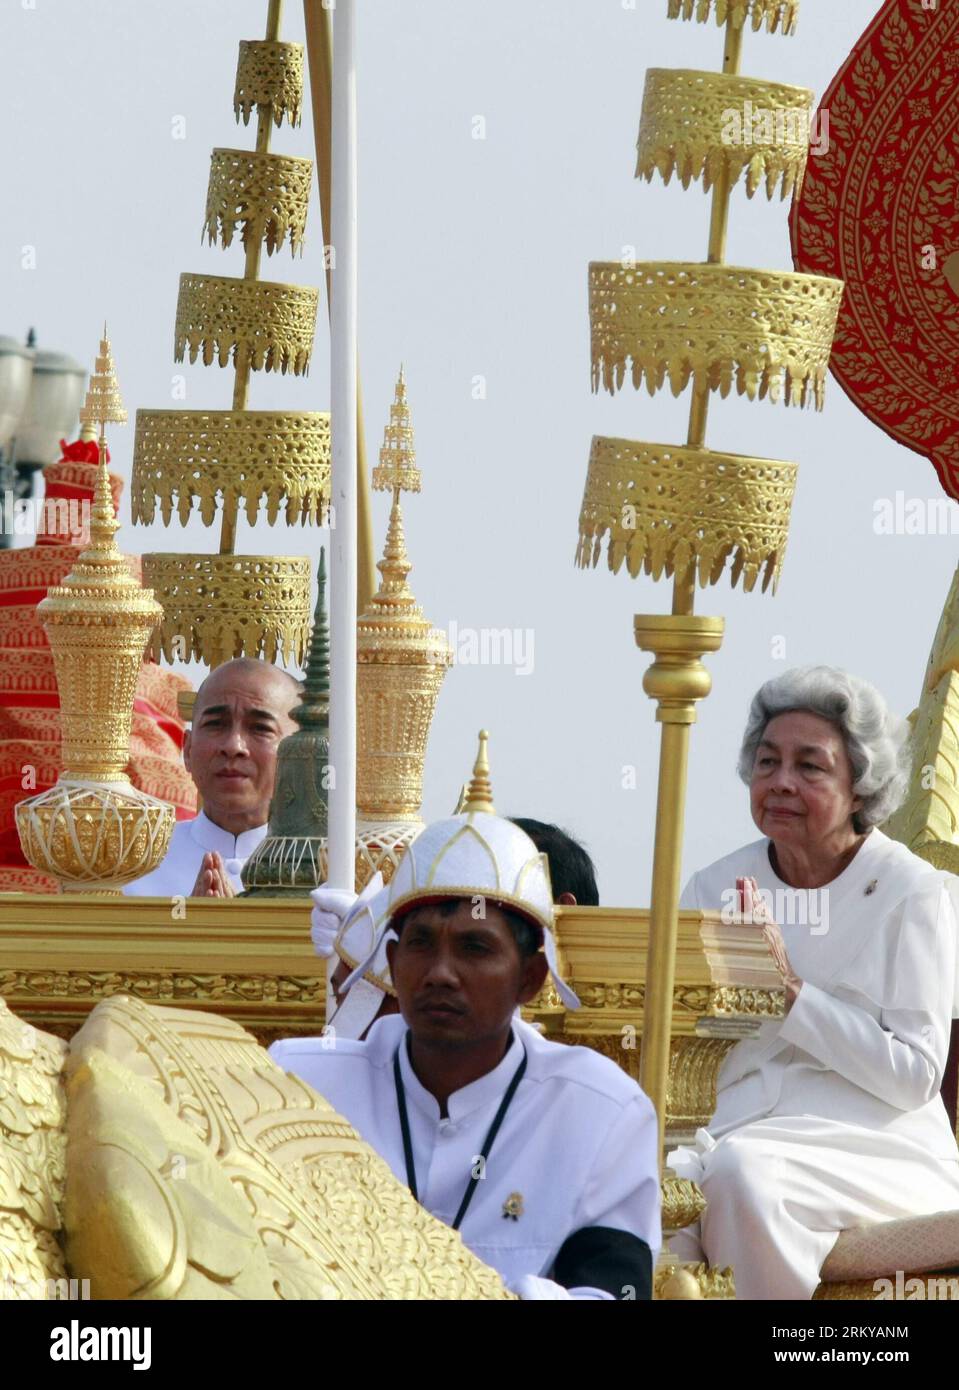 Bildnummer: 59188742  Datum: 07.02.2013  Copyright: imago/Xinhua PHNOM PENH, Feb. 7, 2013 -- Cambodian King Norodom Sihamoni (L) and his mother Queen Norodom Monineath escort the ashes of late King Father Norodom Sihanouk during a procession in Phnom Penh, Cambodia, Feb. 7, 2013. A week-long royal funeral of Cambodia s late King Norodom Sihanouk came to an end on Thursday when part of his cremains were taken from the cremation site to keep in the royal palace in a procession. (Xinhua/Zhao Yishen) (zy) CAMBODIA-KING-FATHER-FUNERAL-END PUBLICATIONxNOTxINxCHN Gesellschaft Politk Adel People Begrä Stock Photo